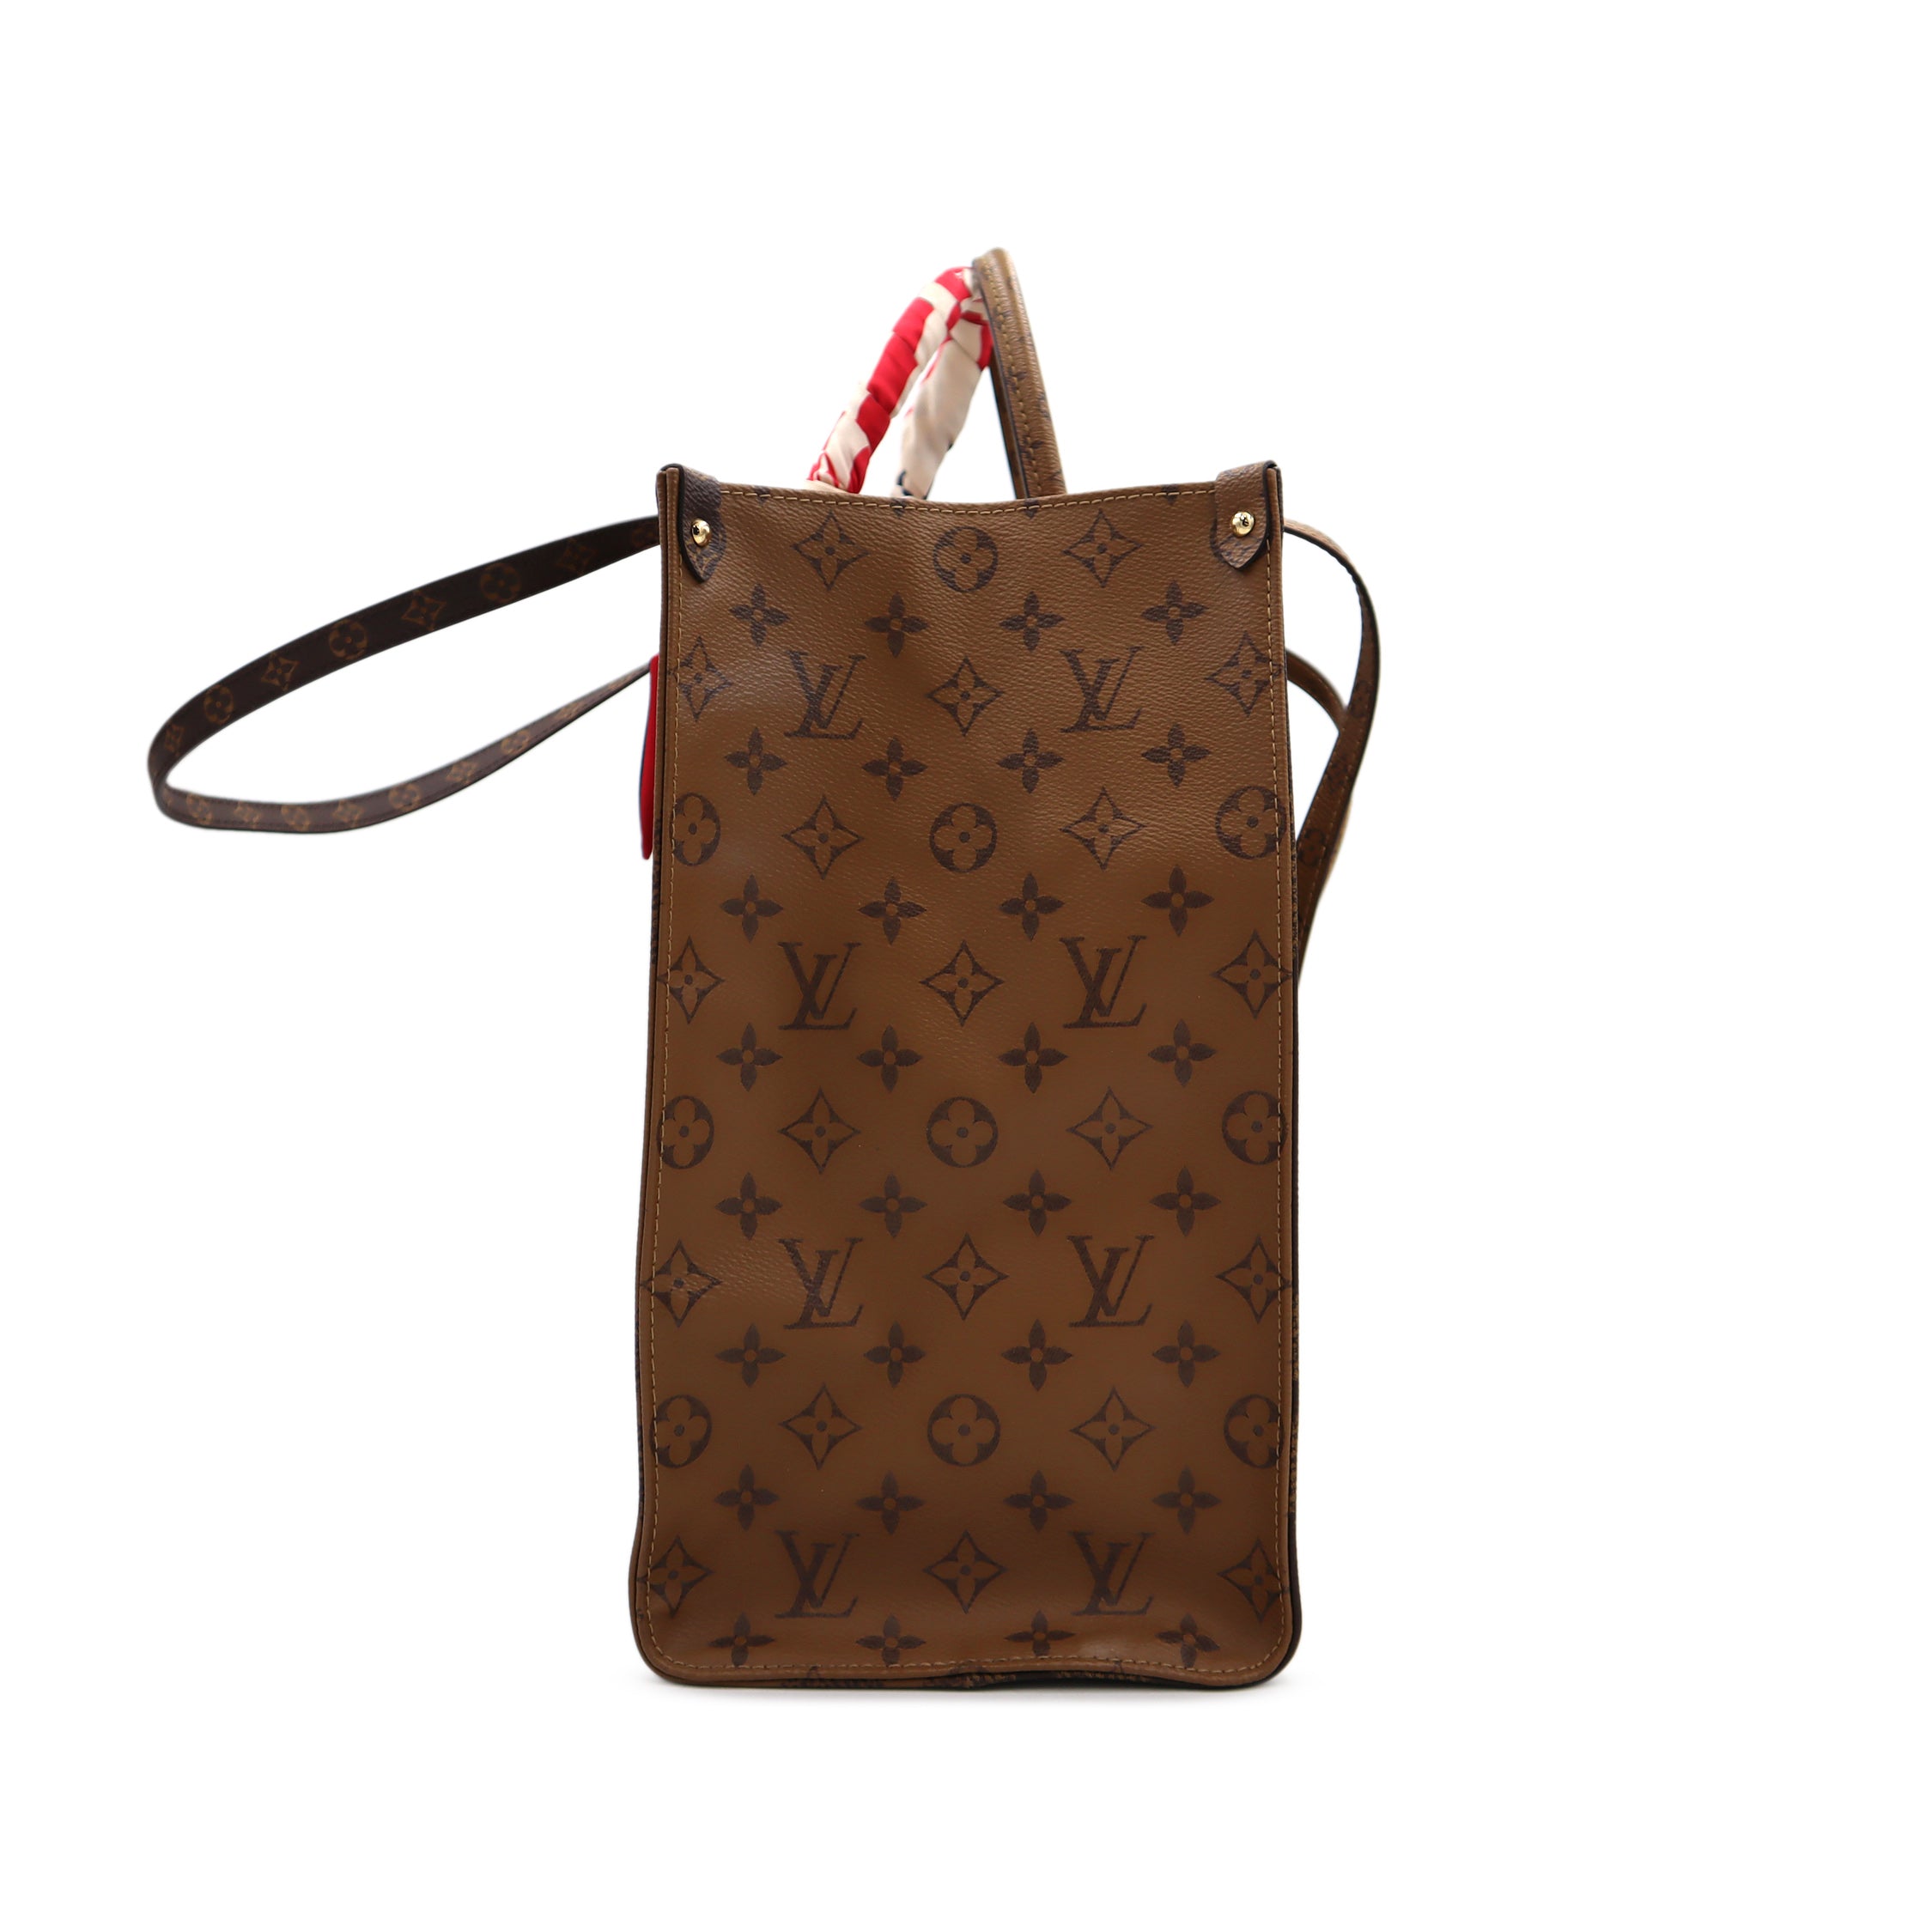 Pre-Owned Louis Vuitton Monogram Giant OntheGo GM Tote Bag with Scarf FL0250